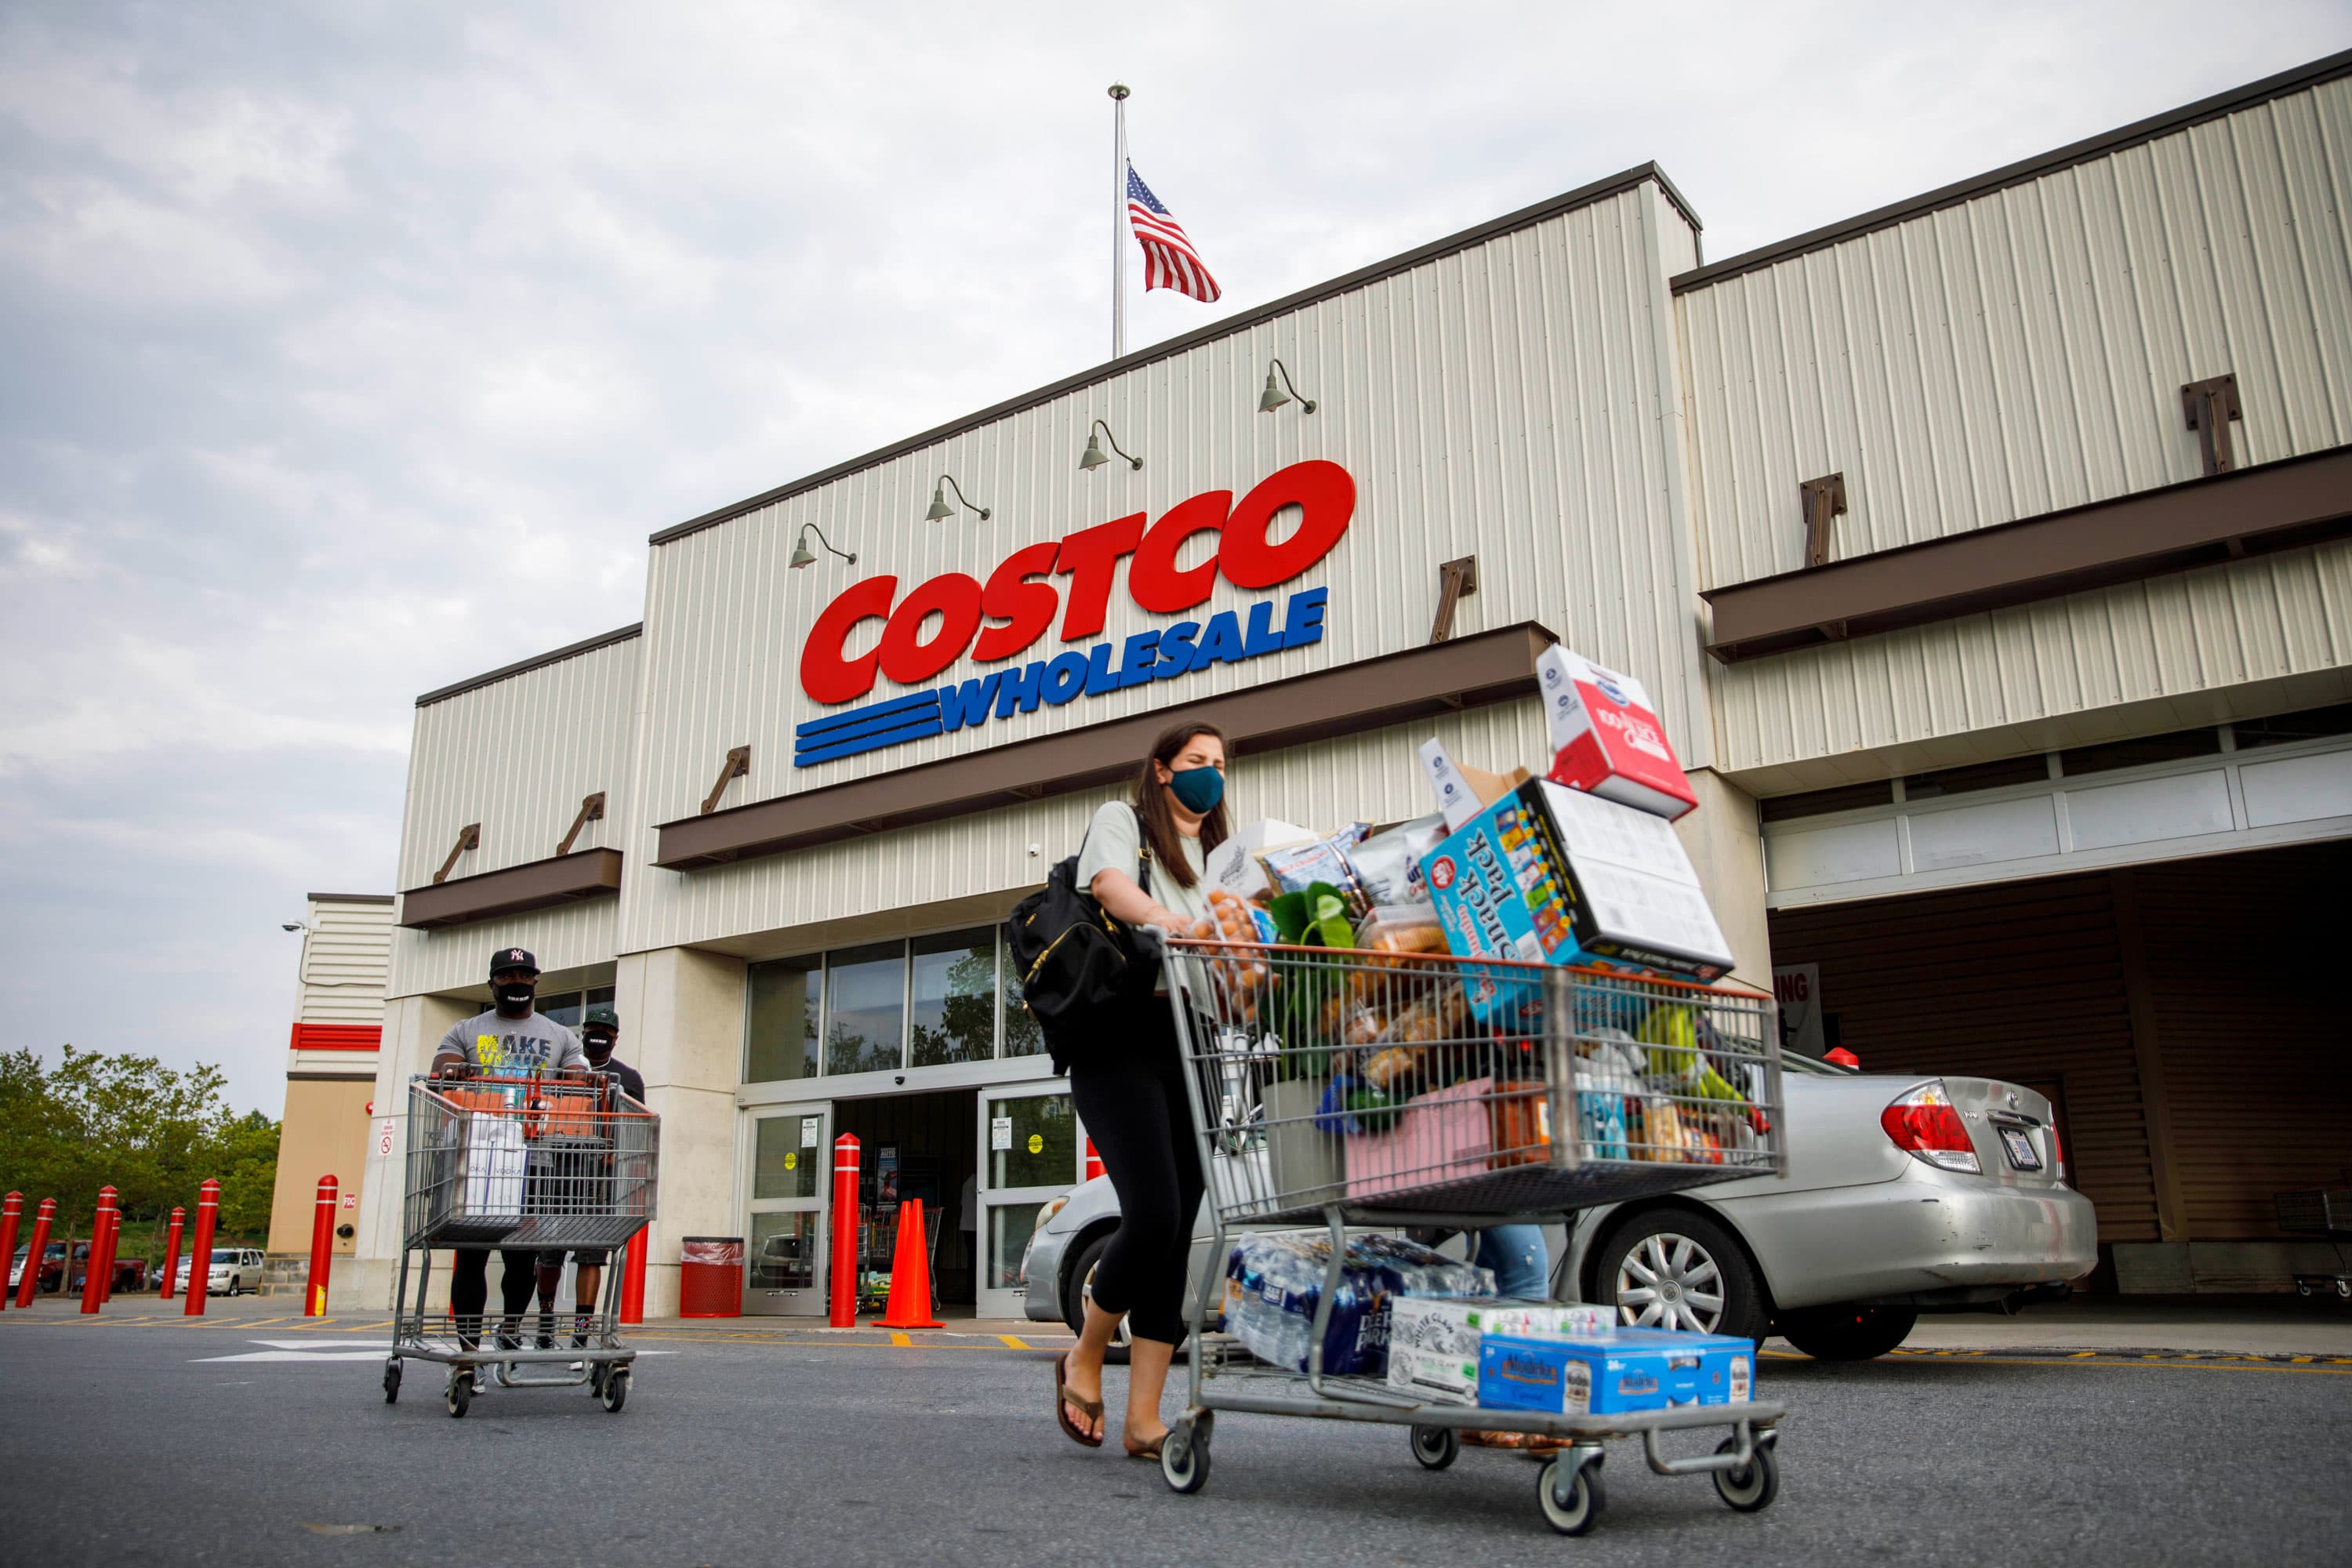 Costco's quarterly results show why we're long-term investors, despite softer sales